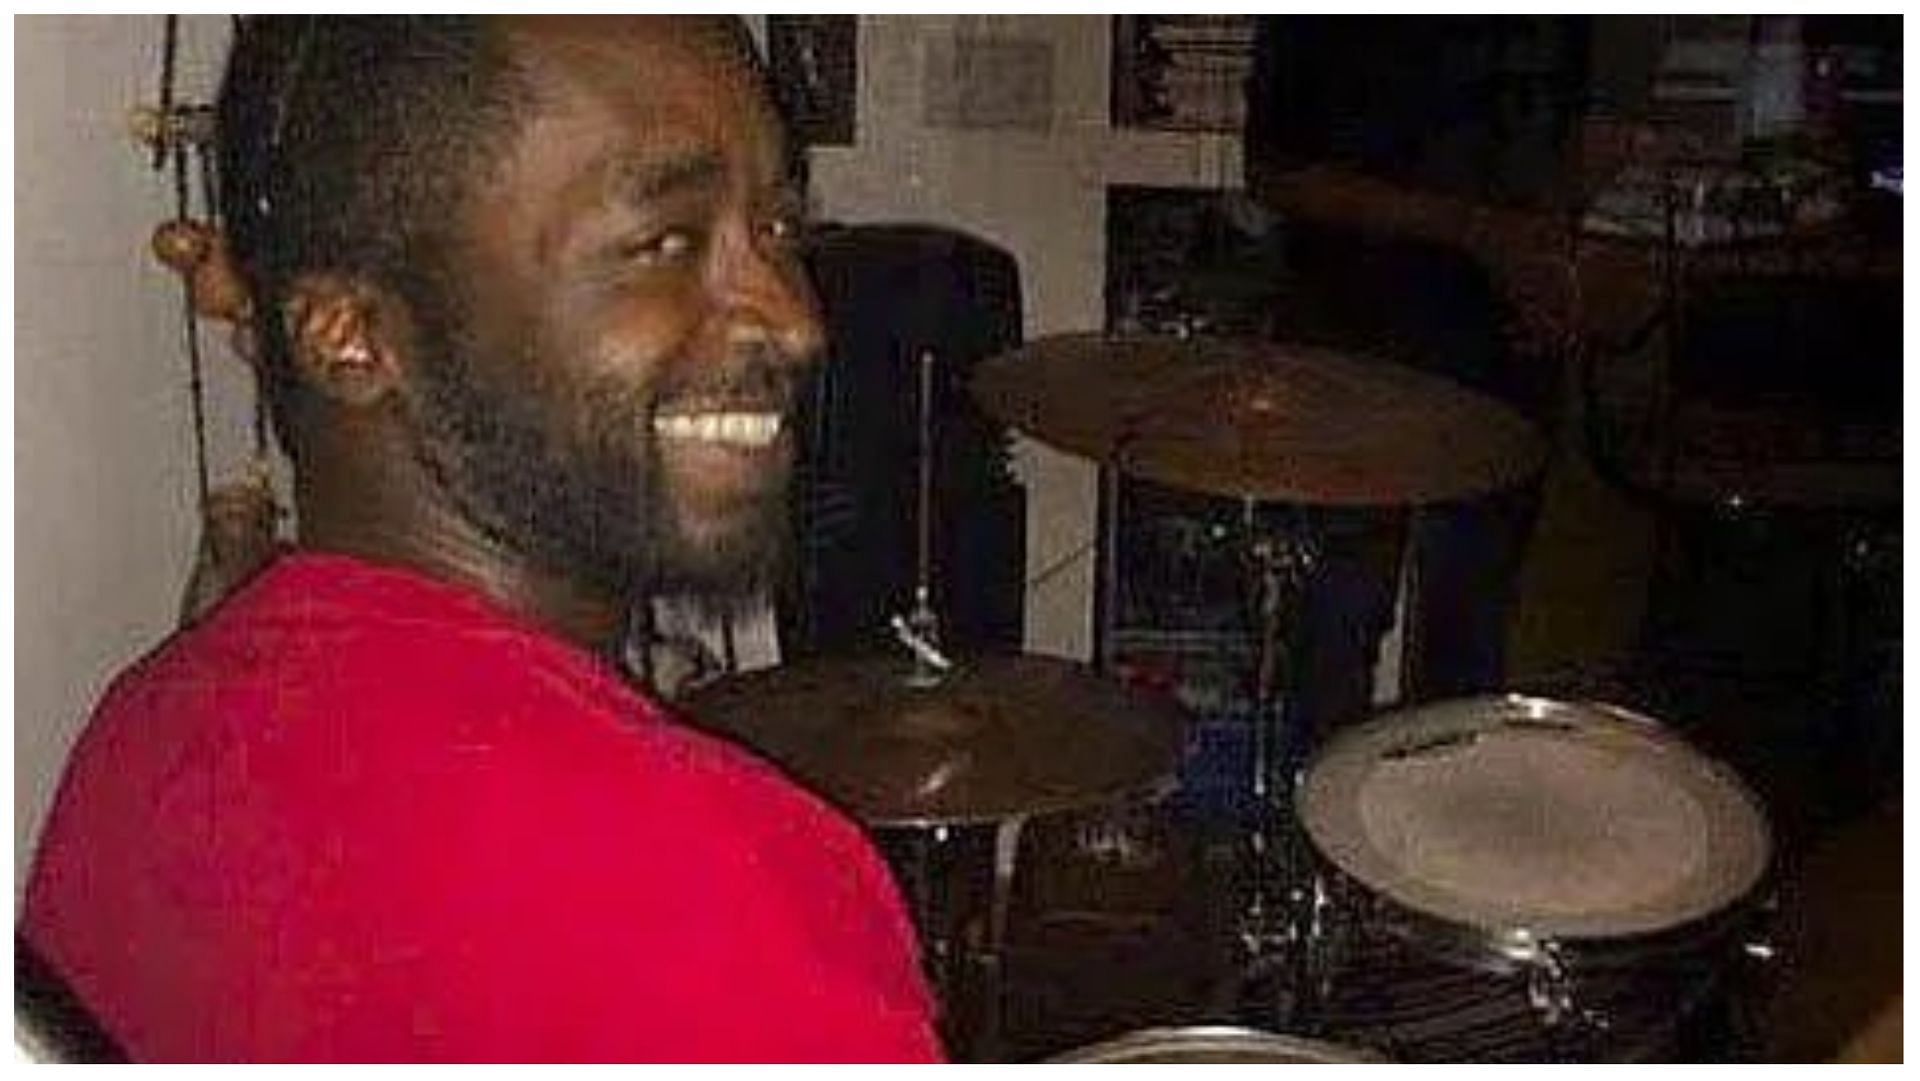 Corey Jones was killed in 2015 by a police officer, (Image via Fifty Shades of Whey/Twitter)